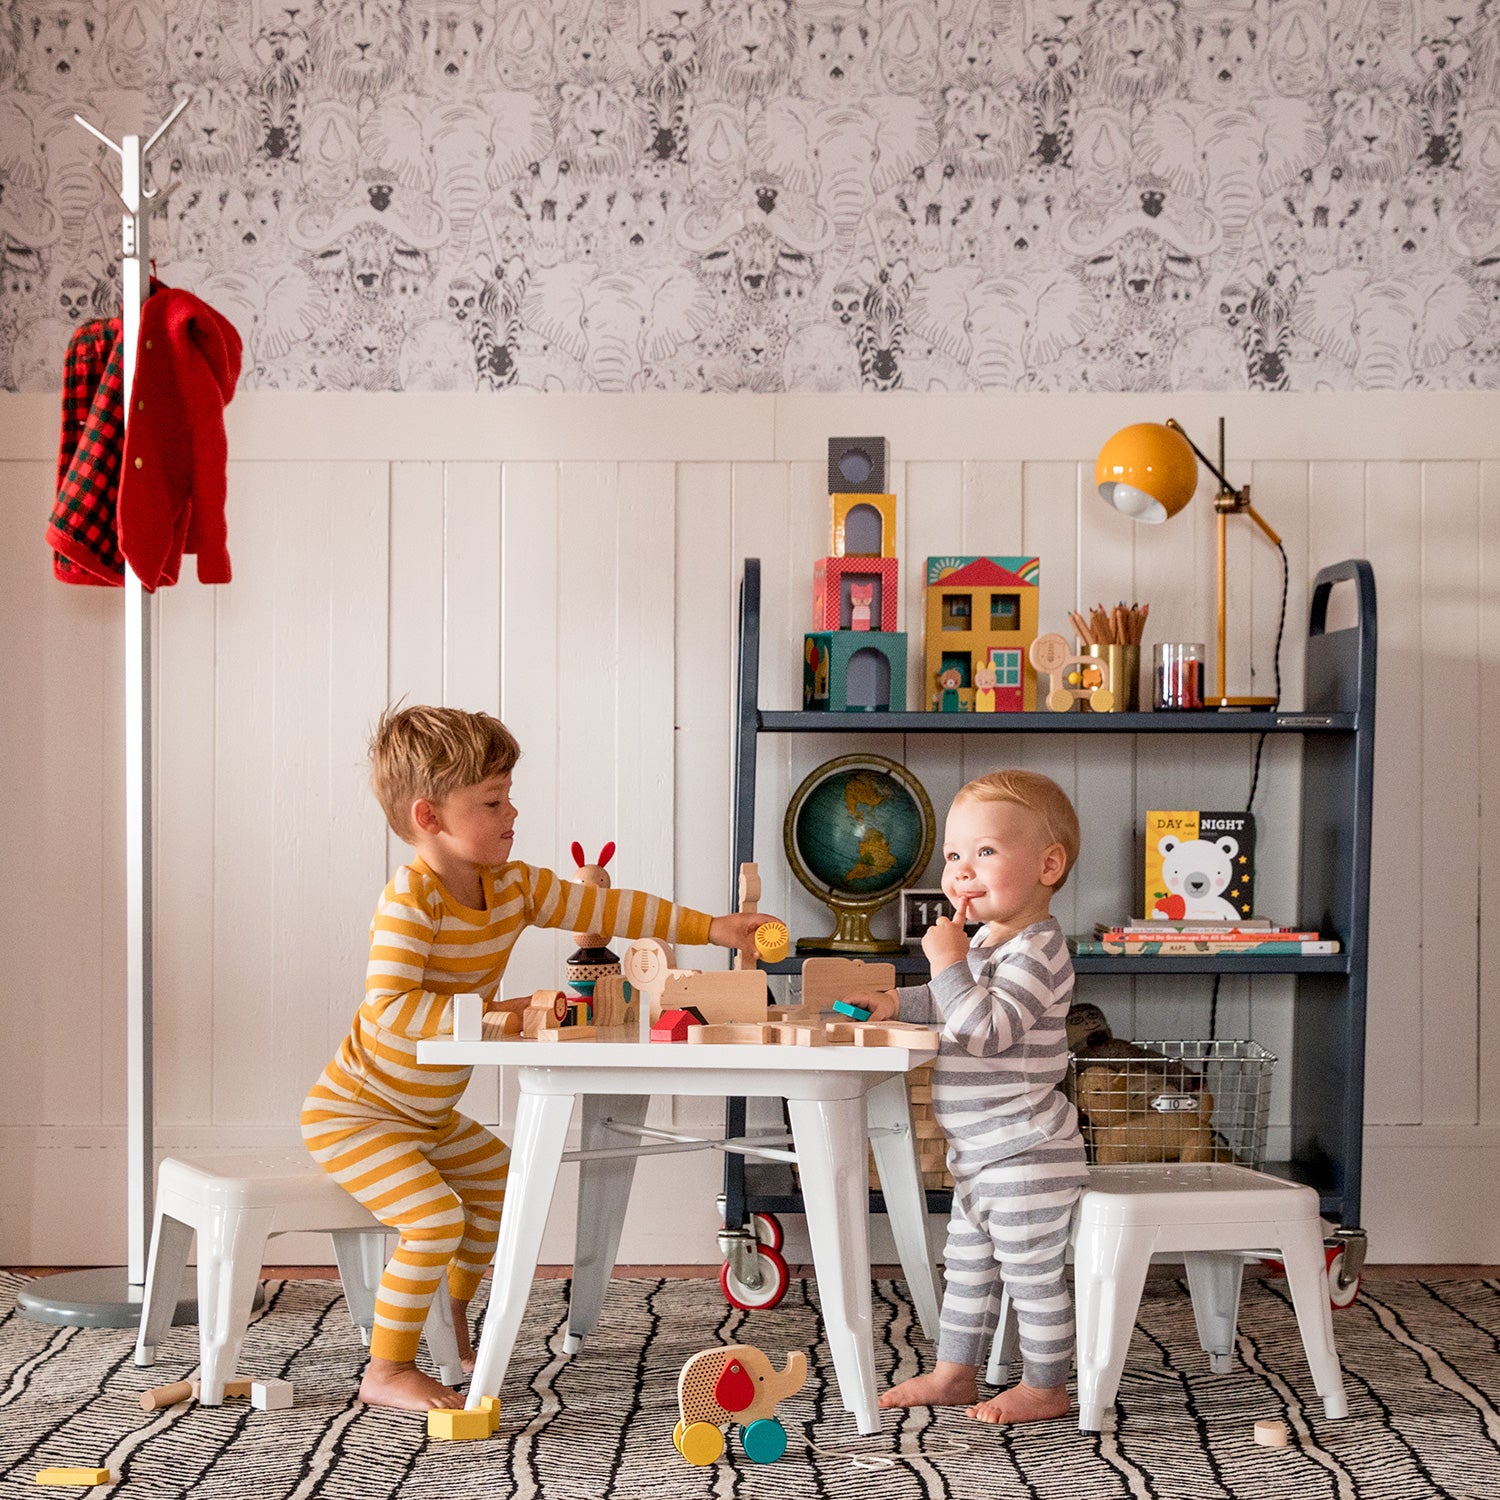 couple of children sitting at a table with toys on it